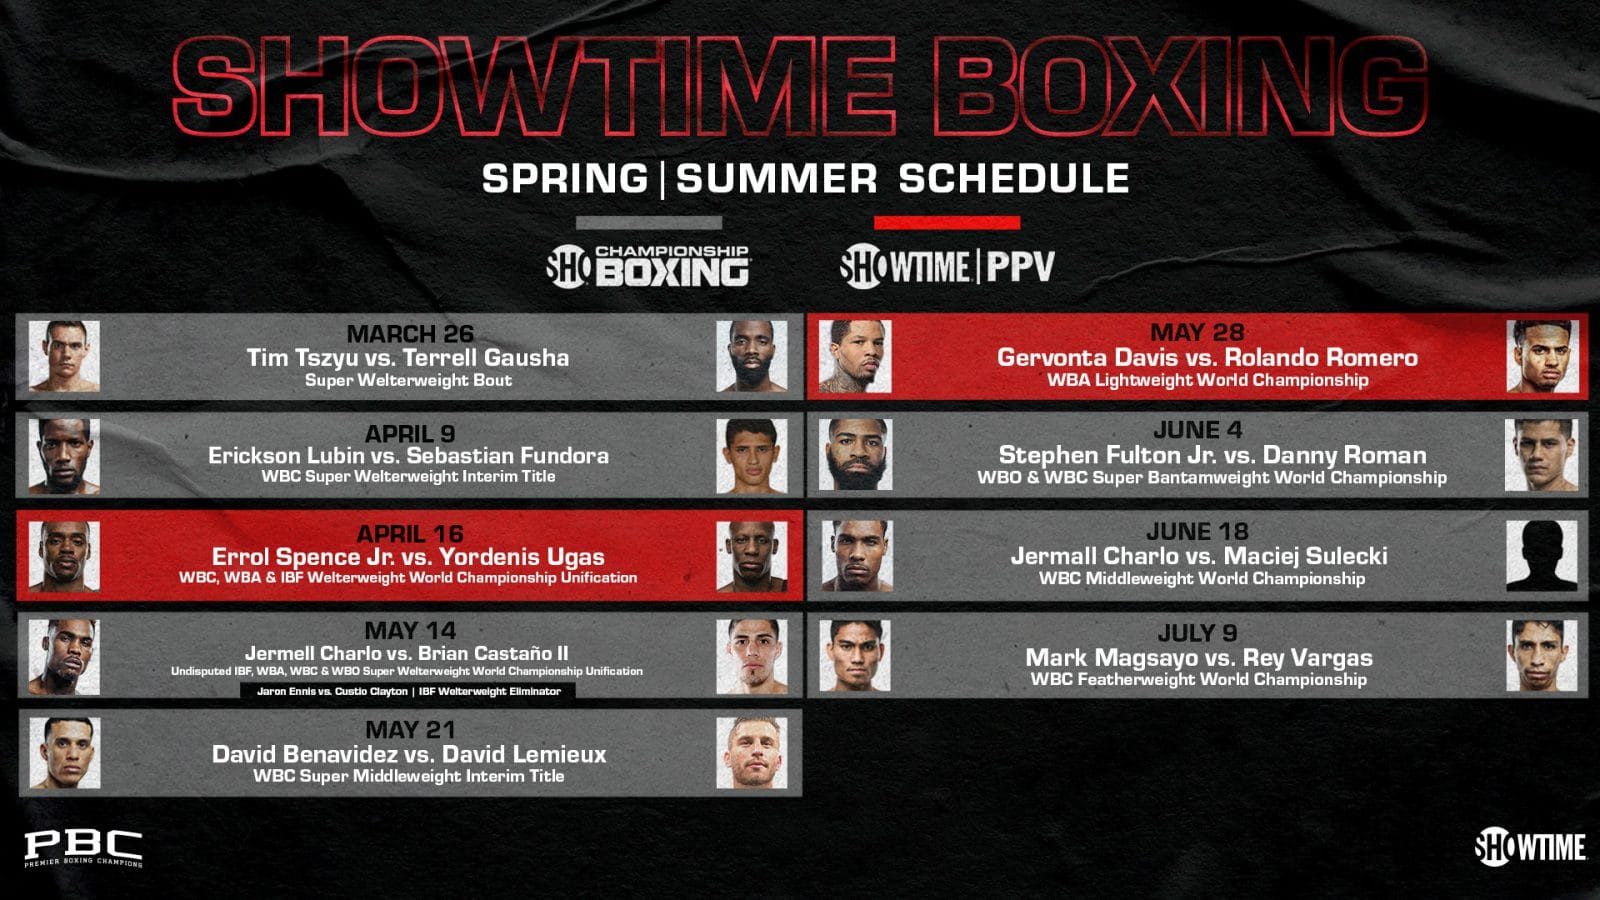 Image: Spence - Ugas, Jermall - Sulecki, & Gervonta - Rolly fights on Showtime in 2022